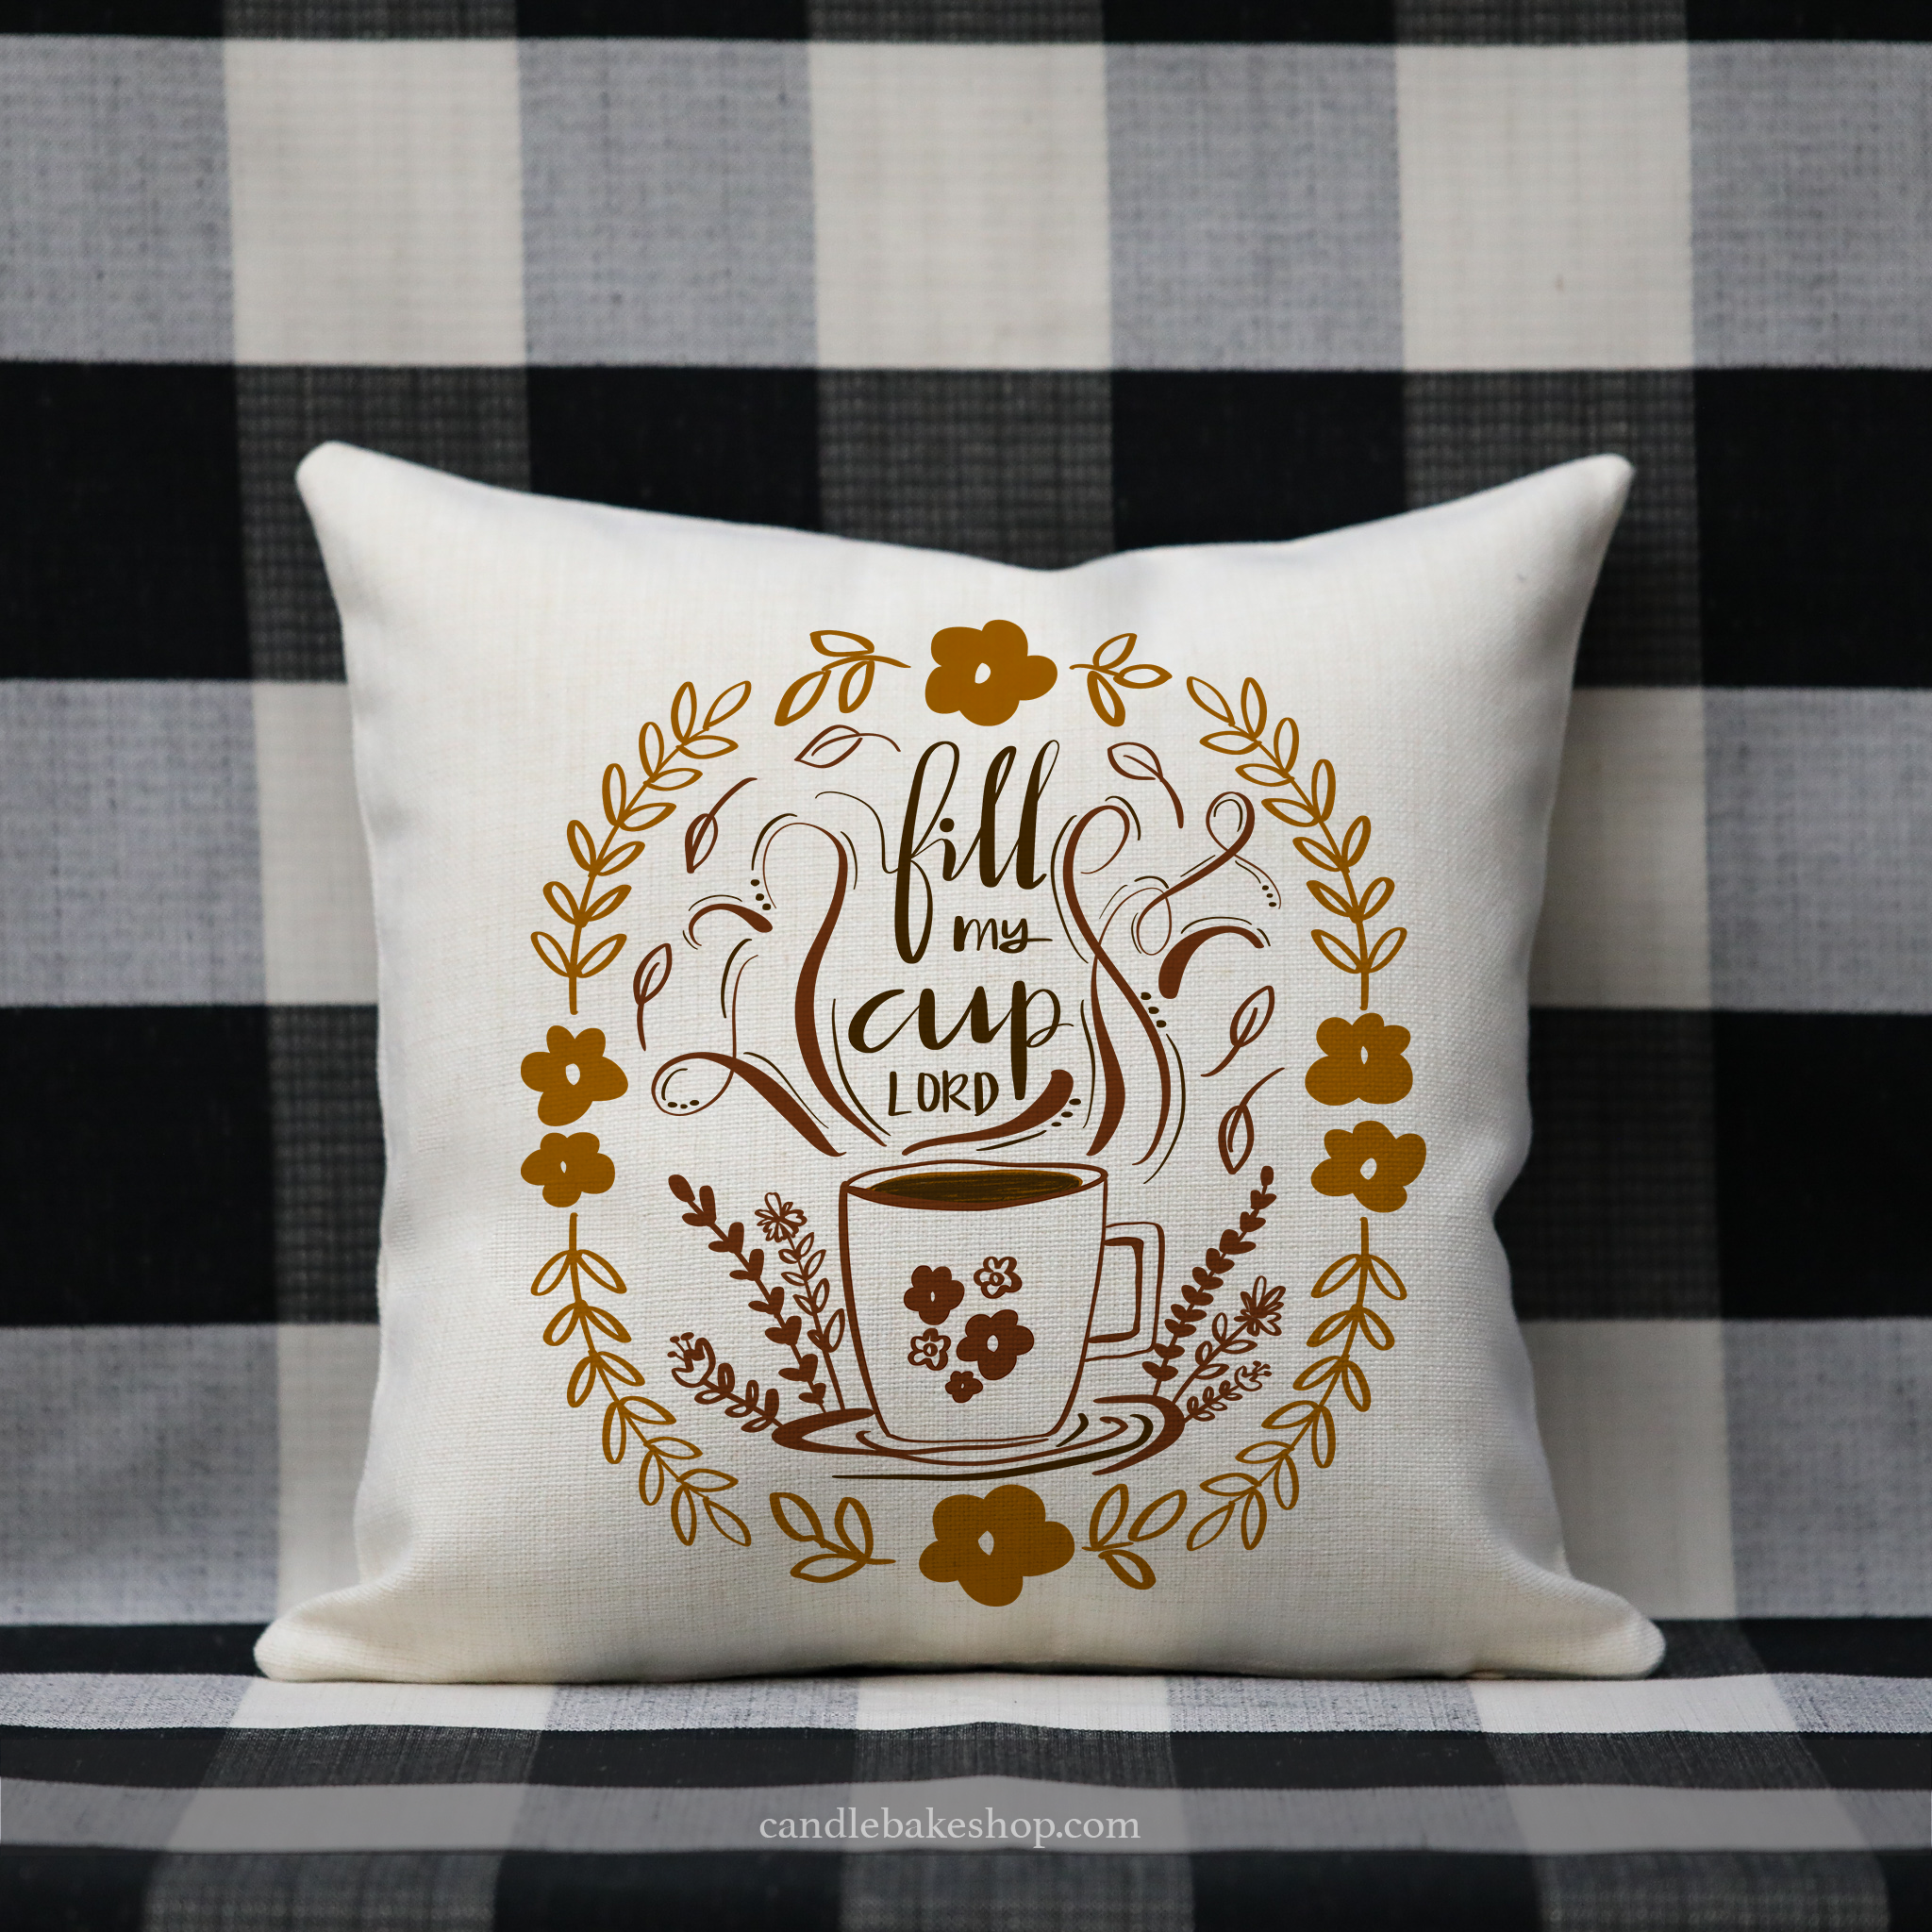 Vintage Inspired Pillow - "Fill My Cup, LORD"